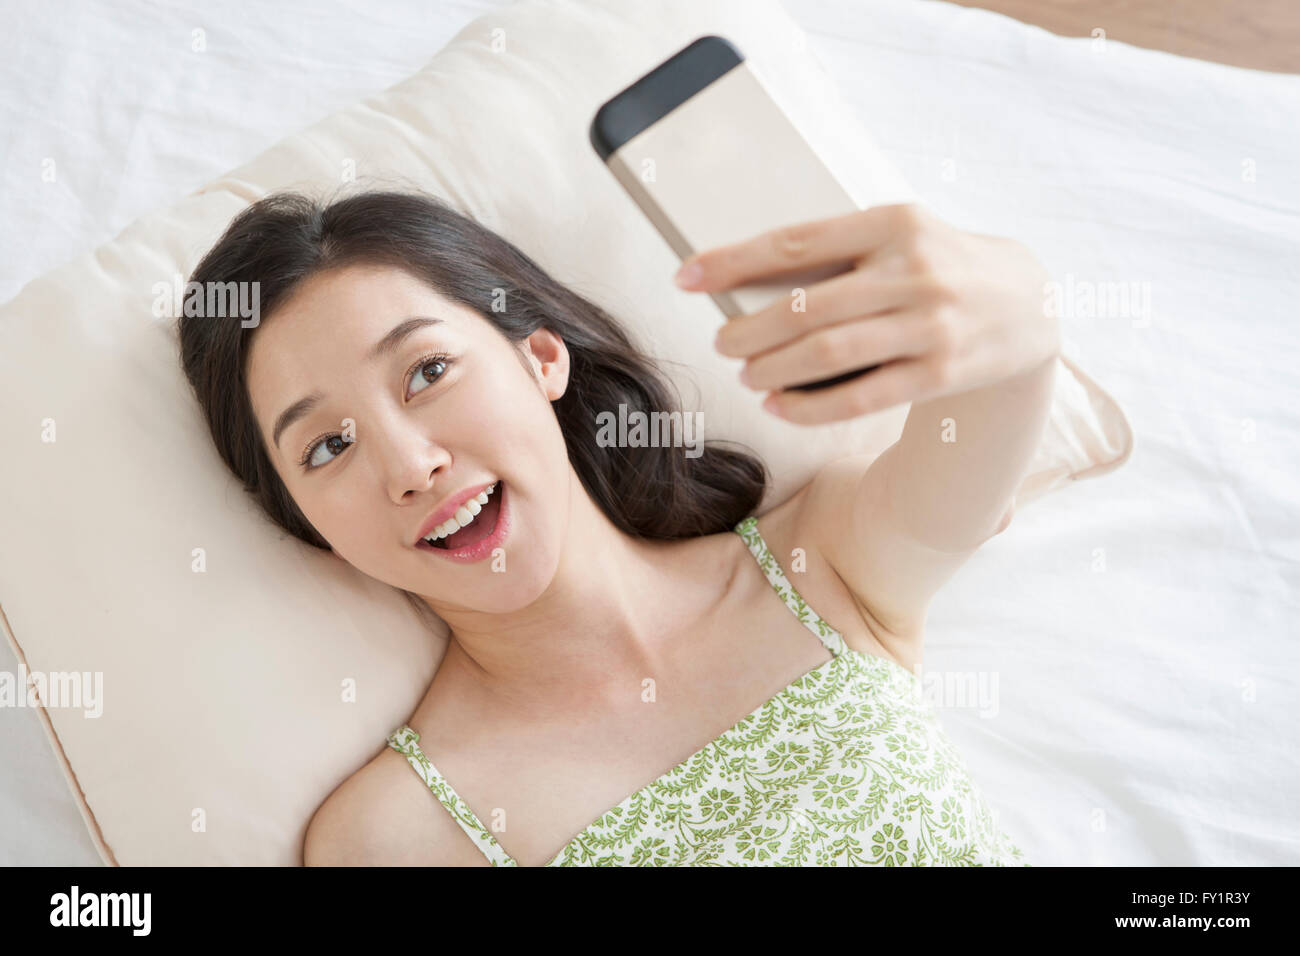 Portrait of young smiling woman lying down on bed and taking picture of herself with smartphone Stock Photo